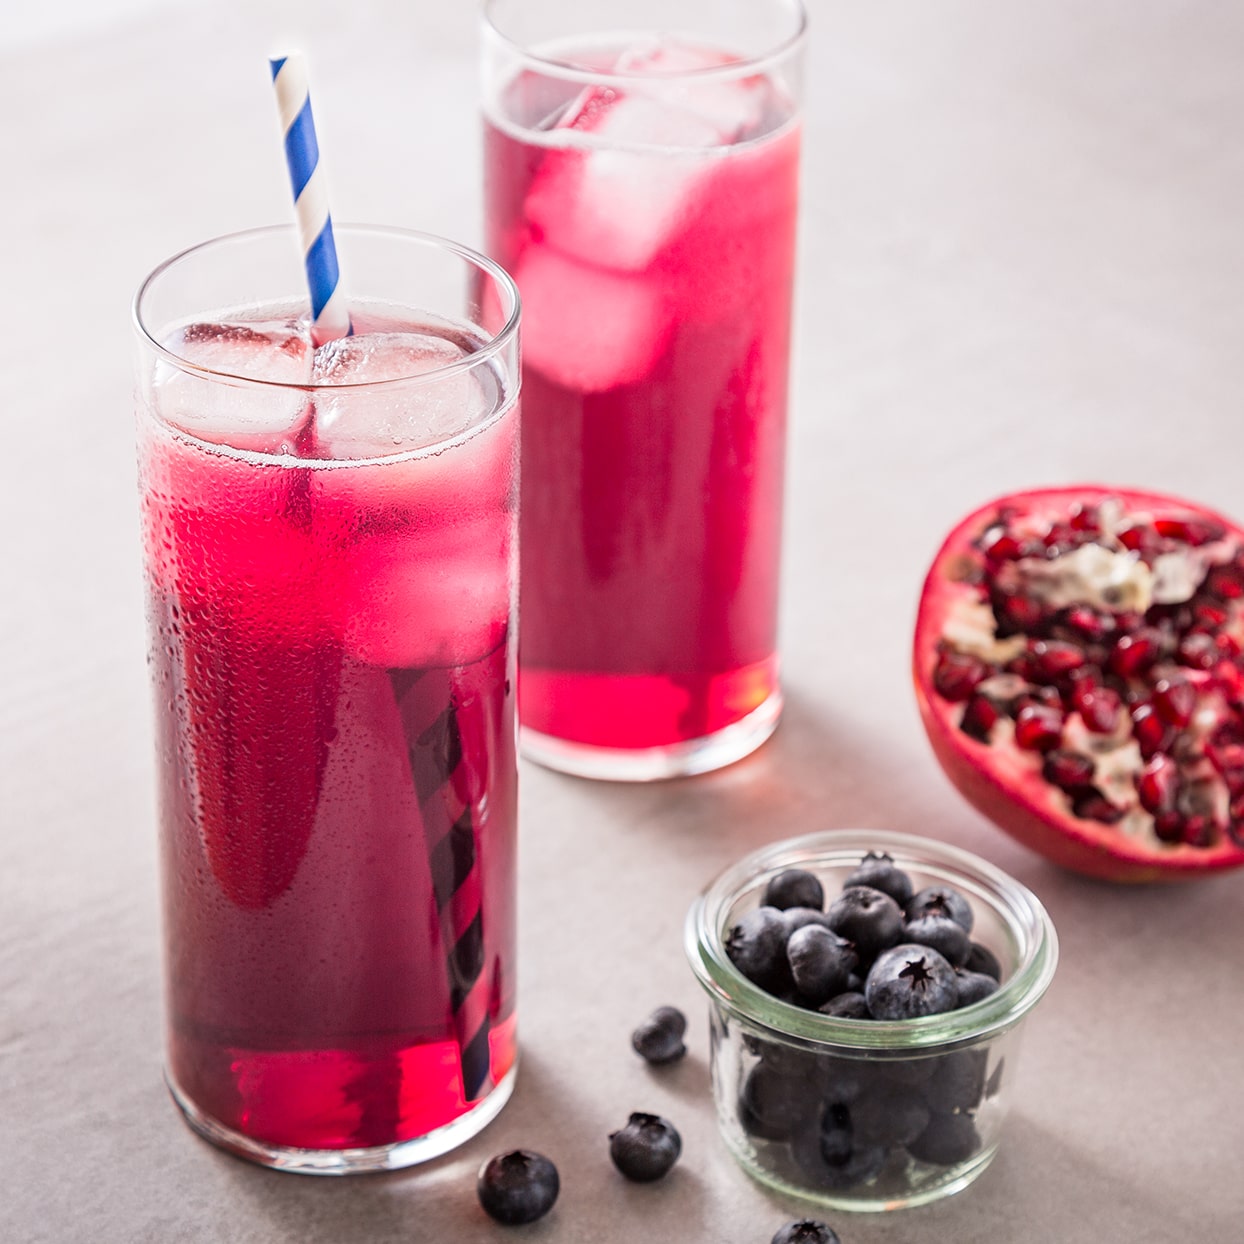 Ensure Clear Blueberry Pomegranate Ready-to-Drink Nutrition Drink